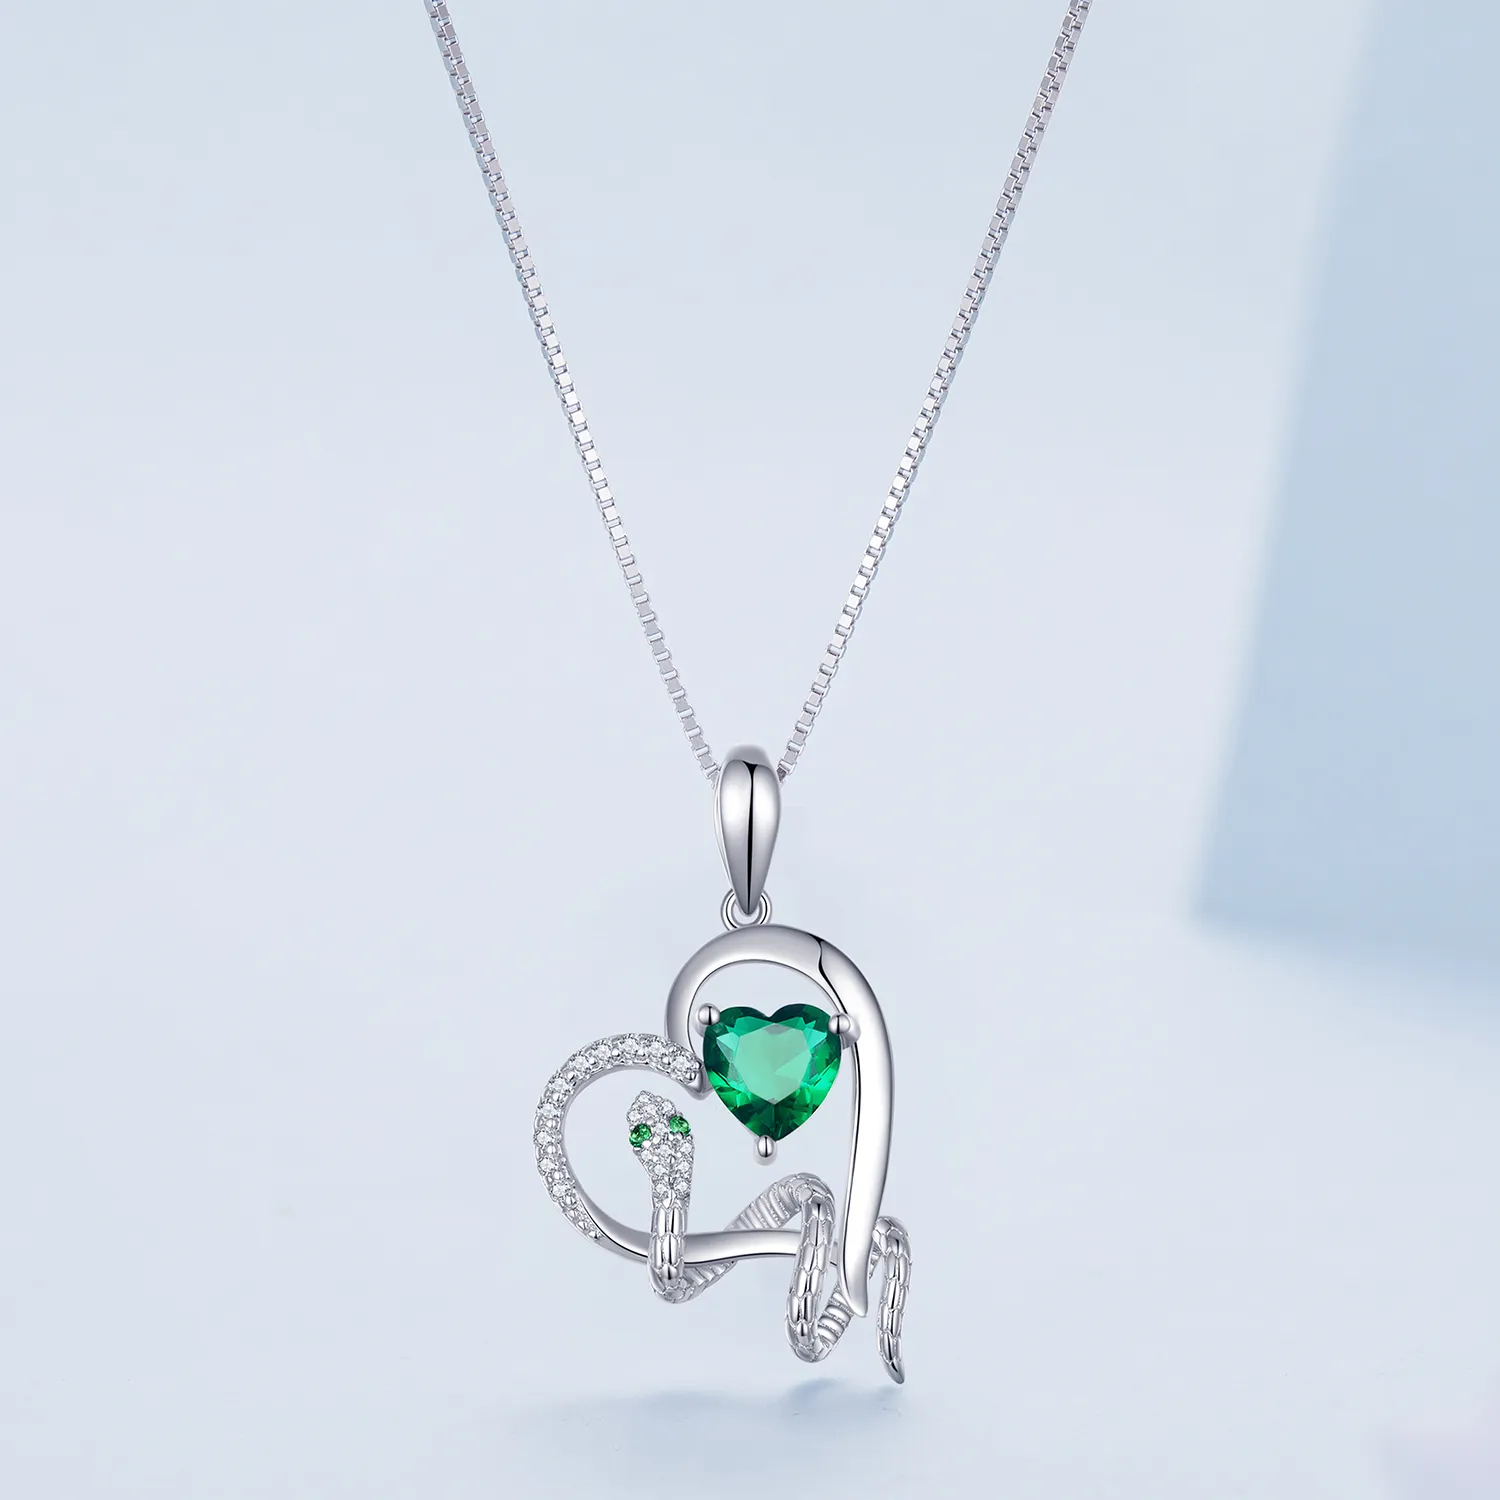 Pandora Style Necklace with Exquisite Snake Winding Heart Shape - BSN327